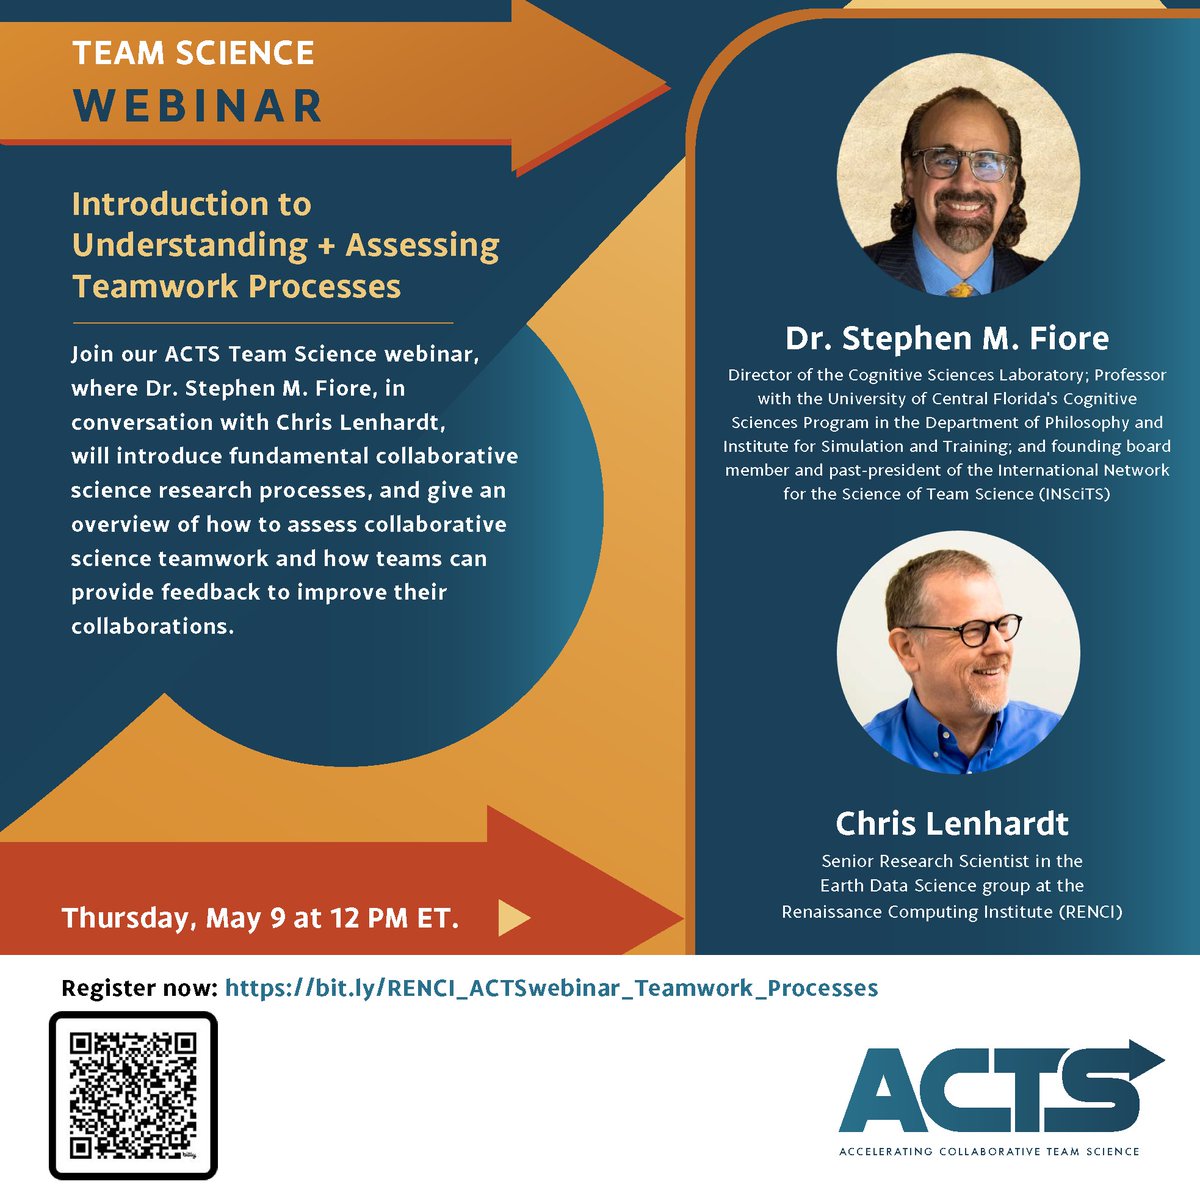 RENCI is excited to announce the next Accelerating Collaborative #TeamScience #webinar. On May 9, @drsfiore (@UCF) in conversation with @lenh_wc (#RENCI), will introduce fundamental #collaborativescience #research processes. #collaboration

Register here: bit.ly/RENCI_ACTSwebi…